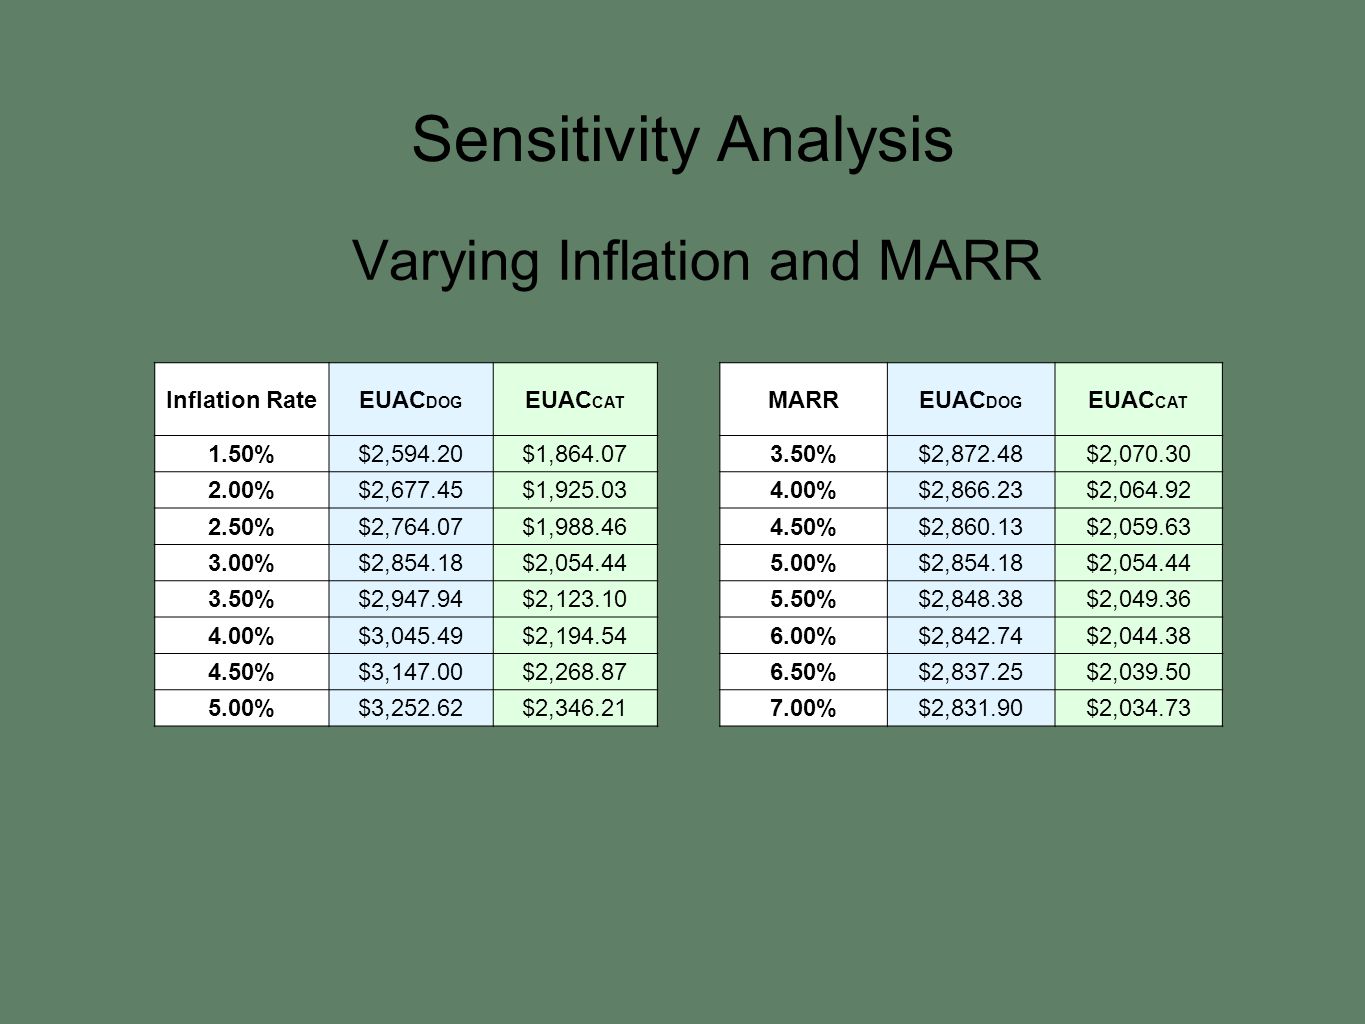 Sensitivity Analysis Varying Inflation and MARR Inflation RateEUAC DOG EUAC CAT 1.50%$2,594.20$1, %$2,677.45$1, %$2,764.07$1, %$2,854.18$2, %$2,947.94$2, %$3,045.49$2, %$3,147.00$2, %$3,252.62$2, MARREUAC DOG EUAC CAT 3.50%$2,872.48$2, %$2,866.23$2, %$2,860.13$2, %$2,854.18$2, %$2,848.38$2, %$2,842.74$2, %$2,837.25$2, %$2,831.90$2,034.73